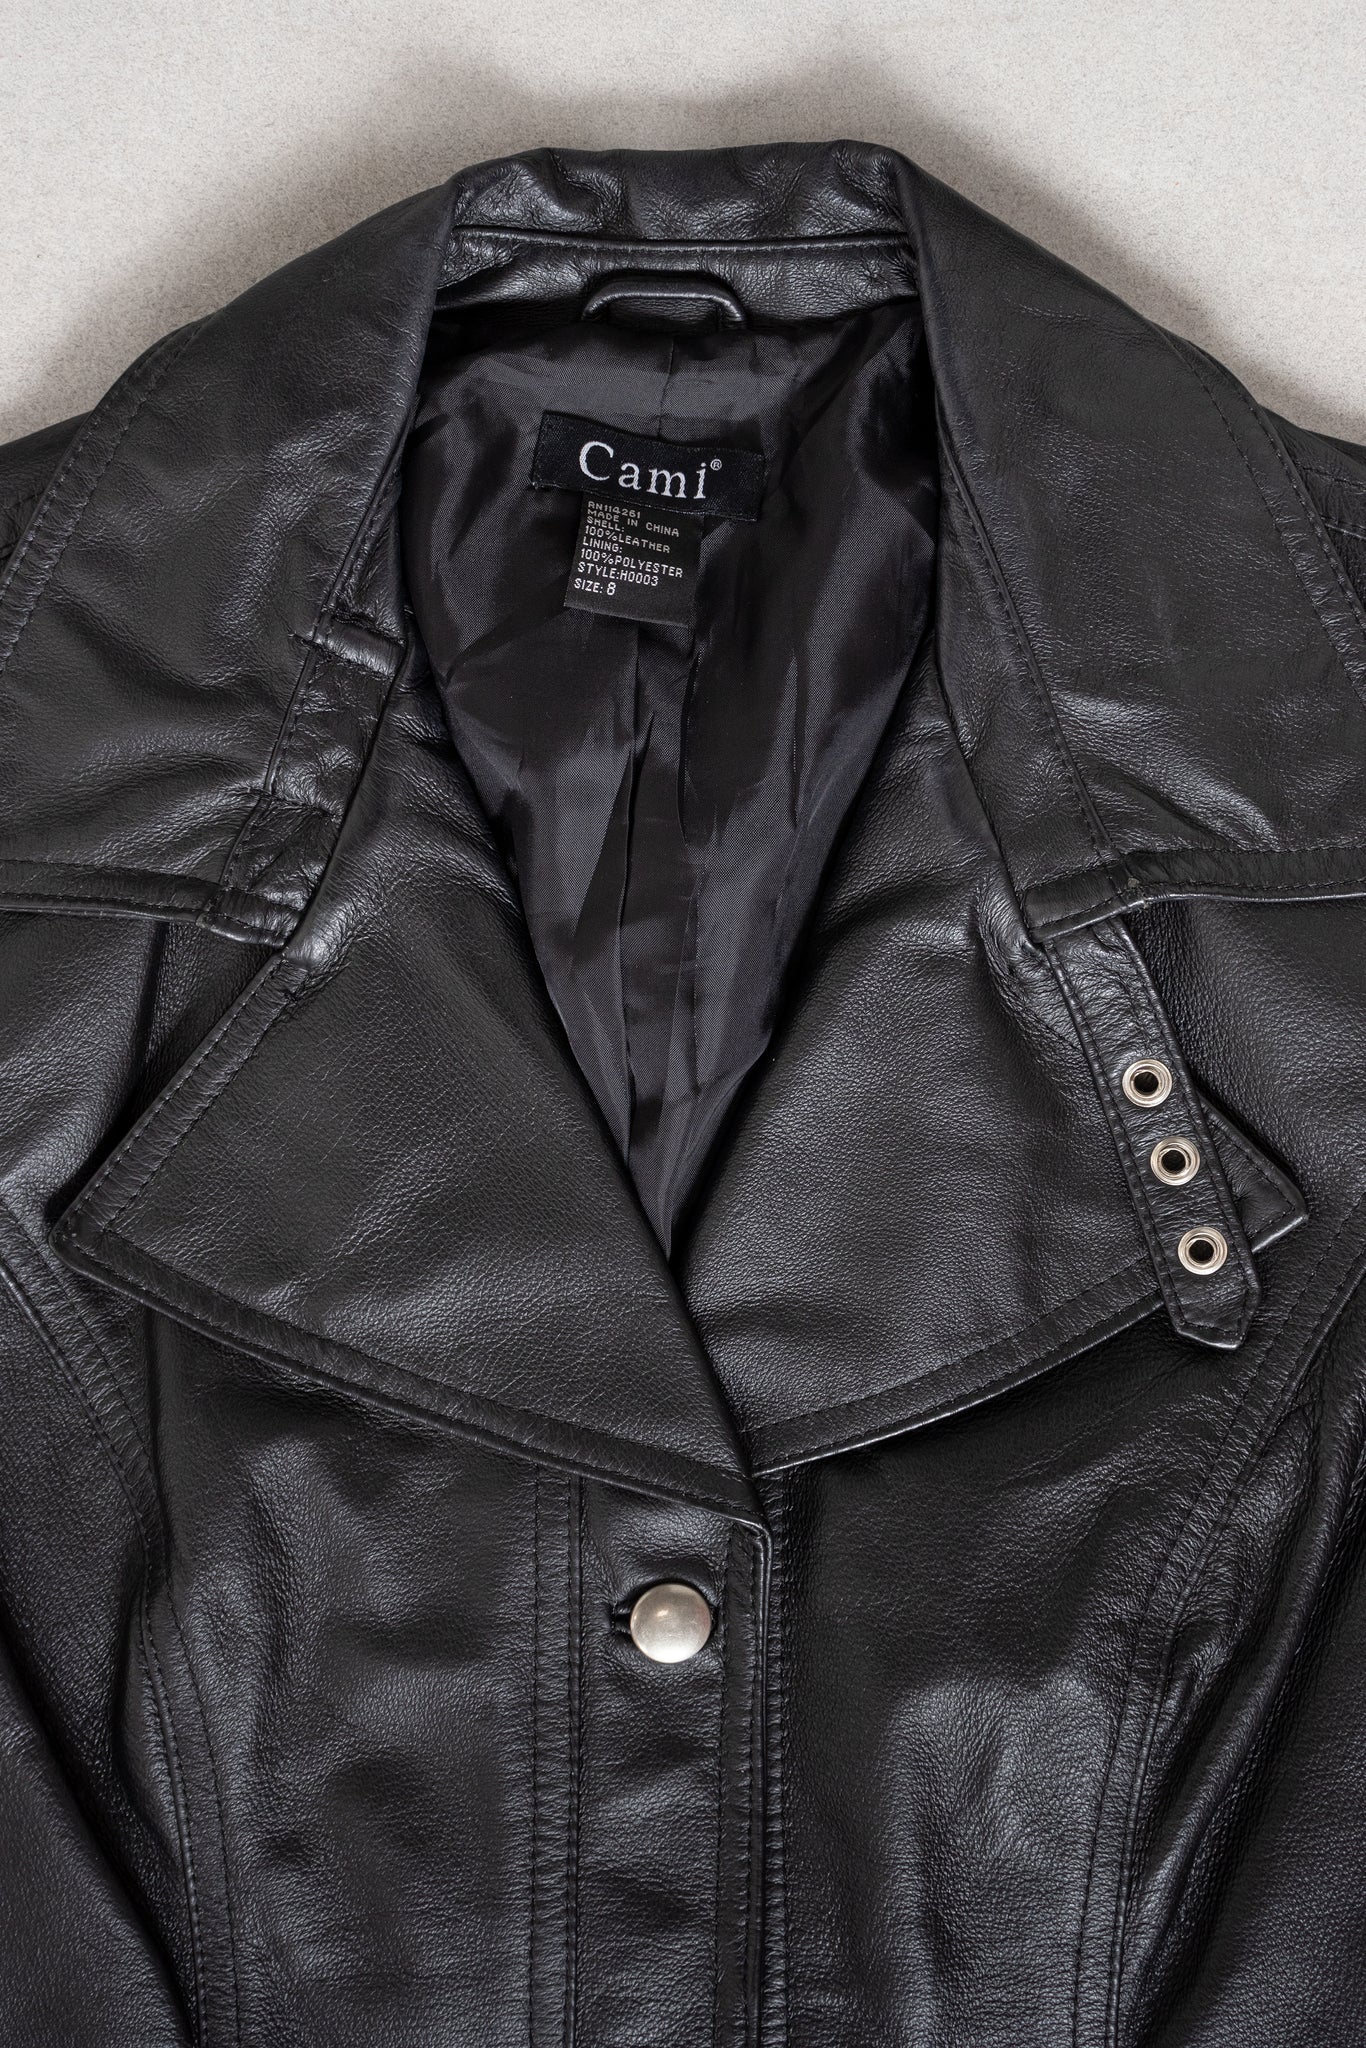 Cami Leather